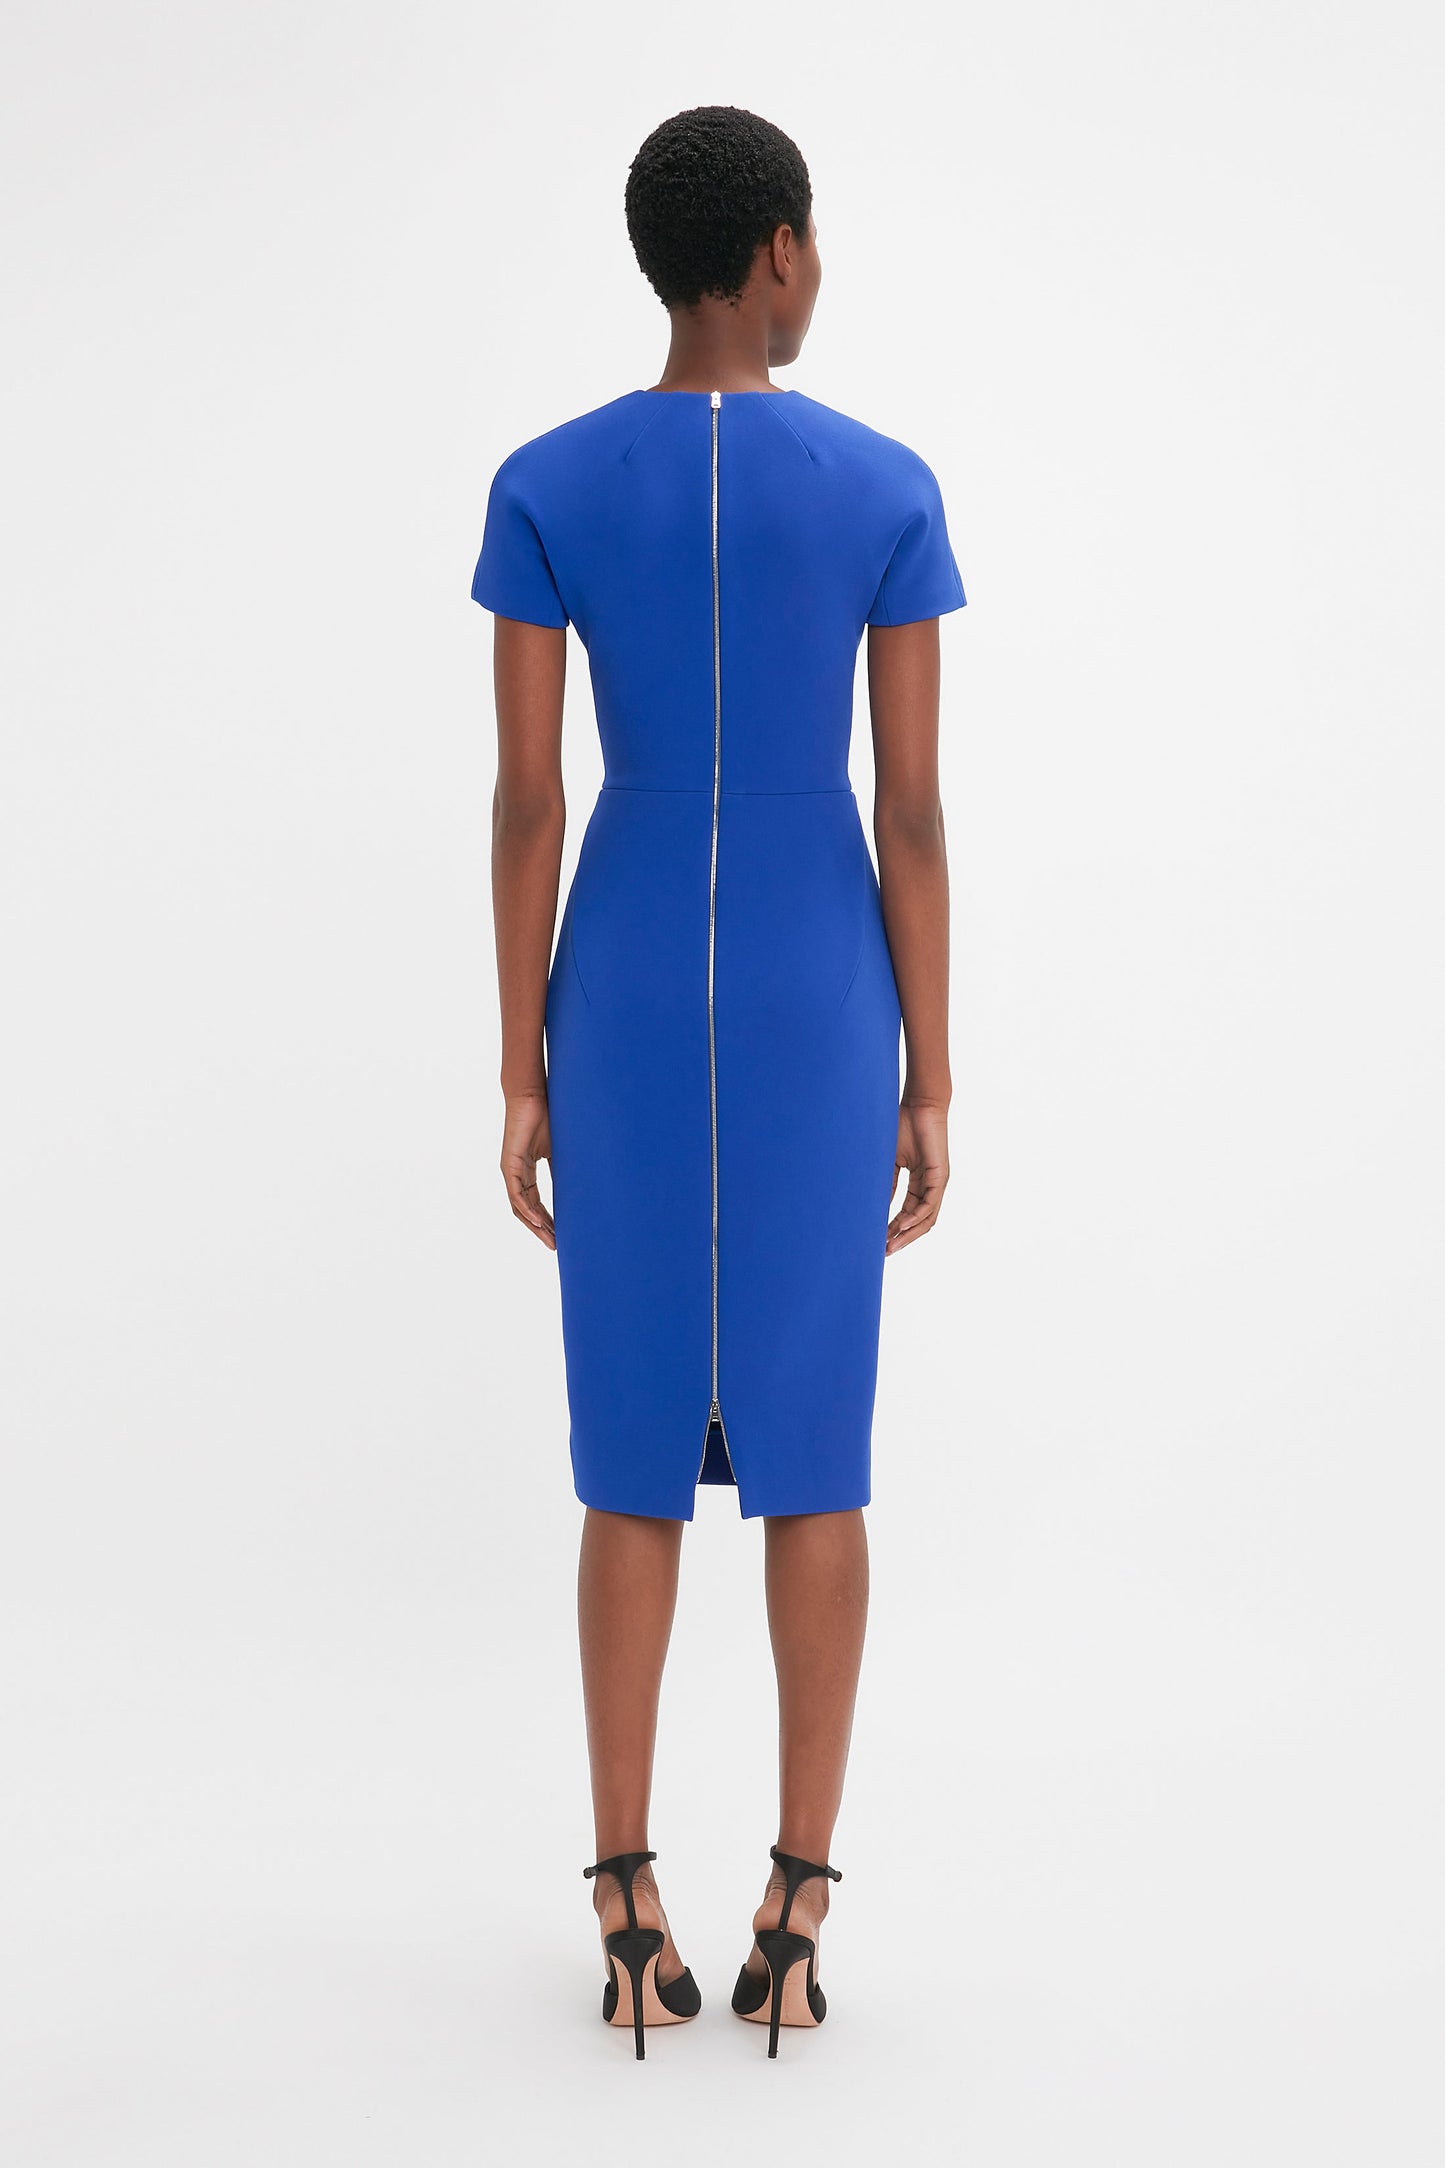 A woman stands facing away, wearing a Victoria Beckham fitted t-shirt dress in palace blue with a back zipper, paired with black heels against a white background.